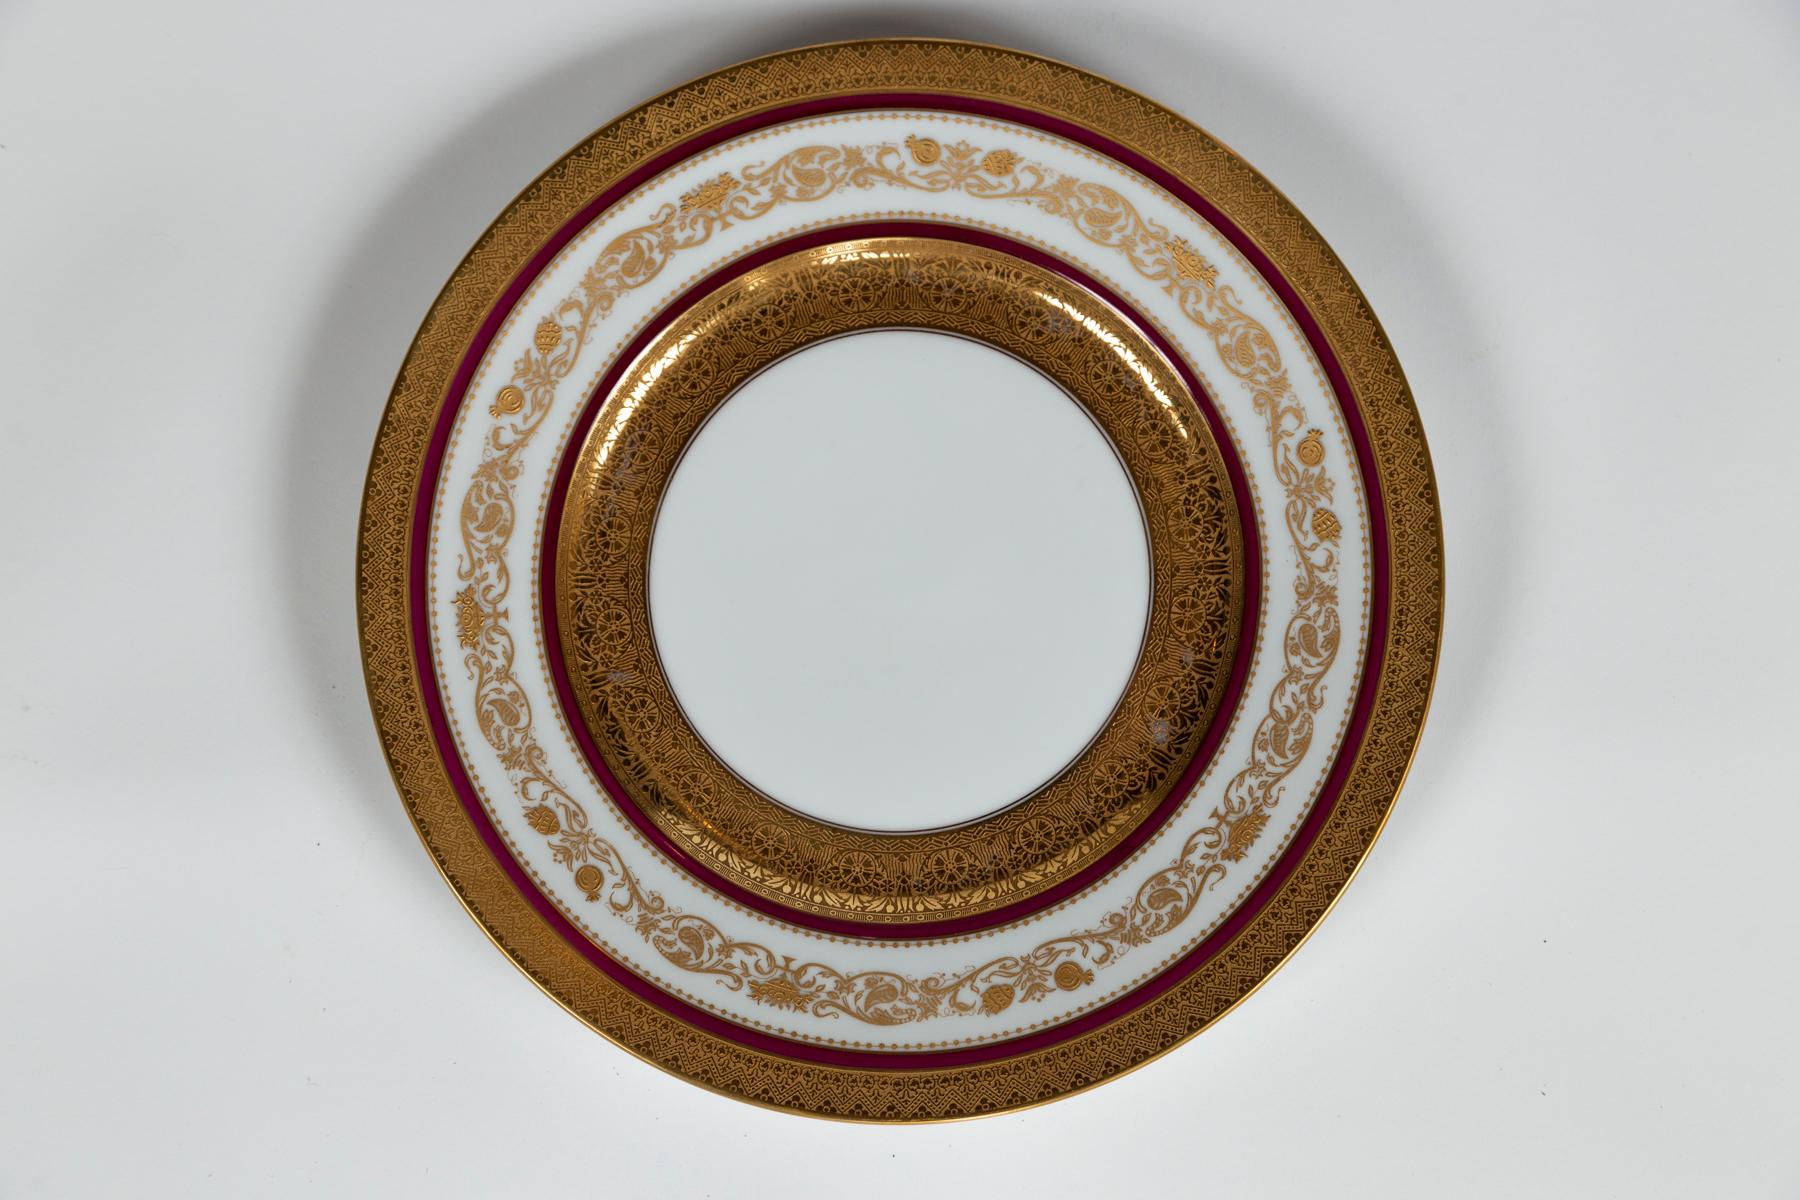 Antique Hutschenreuther Dinner Plates, early 20th century, Bavaria. A beautiful set of 10 dinner plates. Raised gilding with bands of deep red. Marked 'Hutschenreuther Hohenberg Bavaria’, marked used 1901 - 1914.